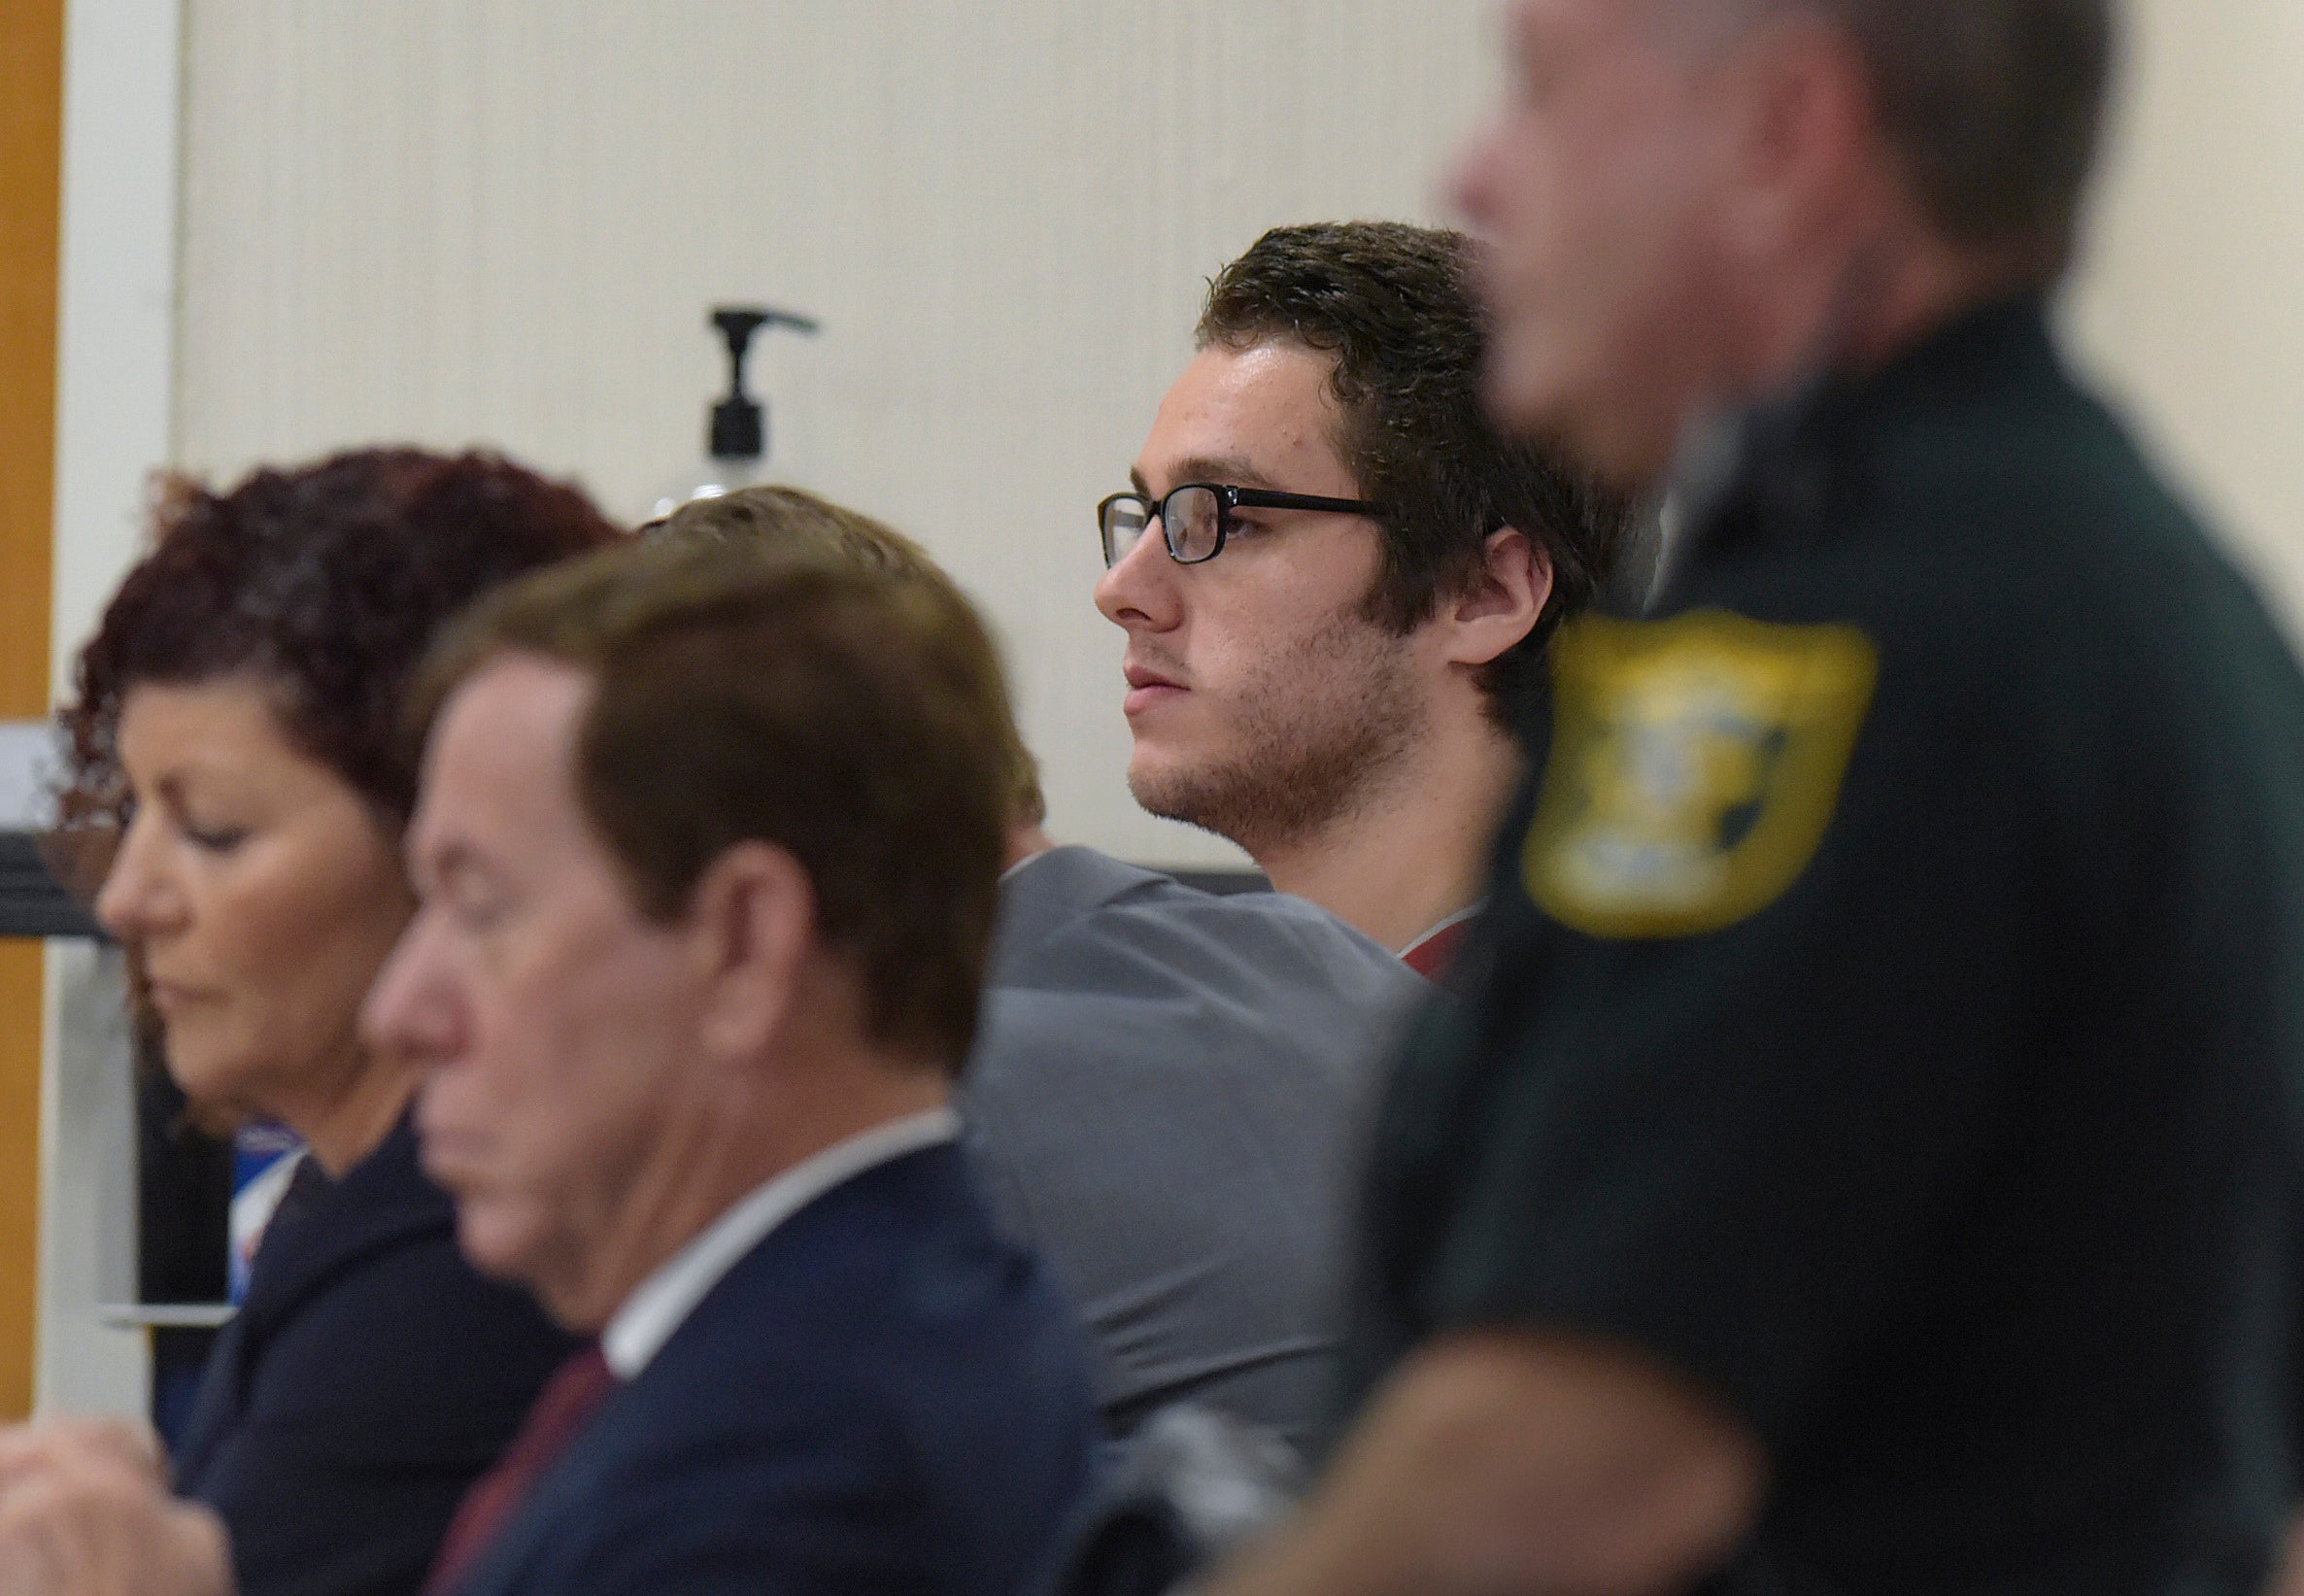 Austin Harrouff, in back, sits with his legal team in court before Circuit Judge Sherwood Bauer at the Martin County Courthouse.